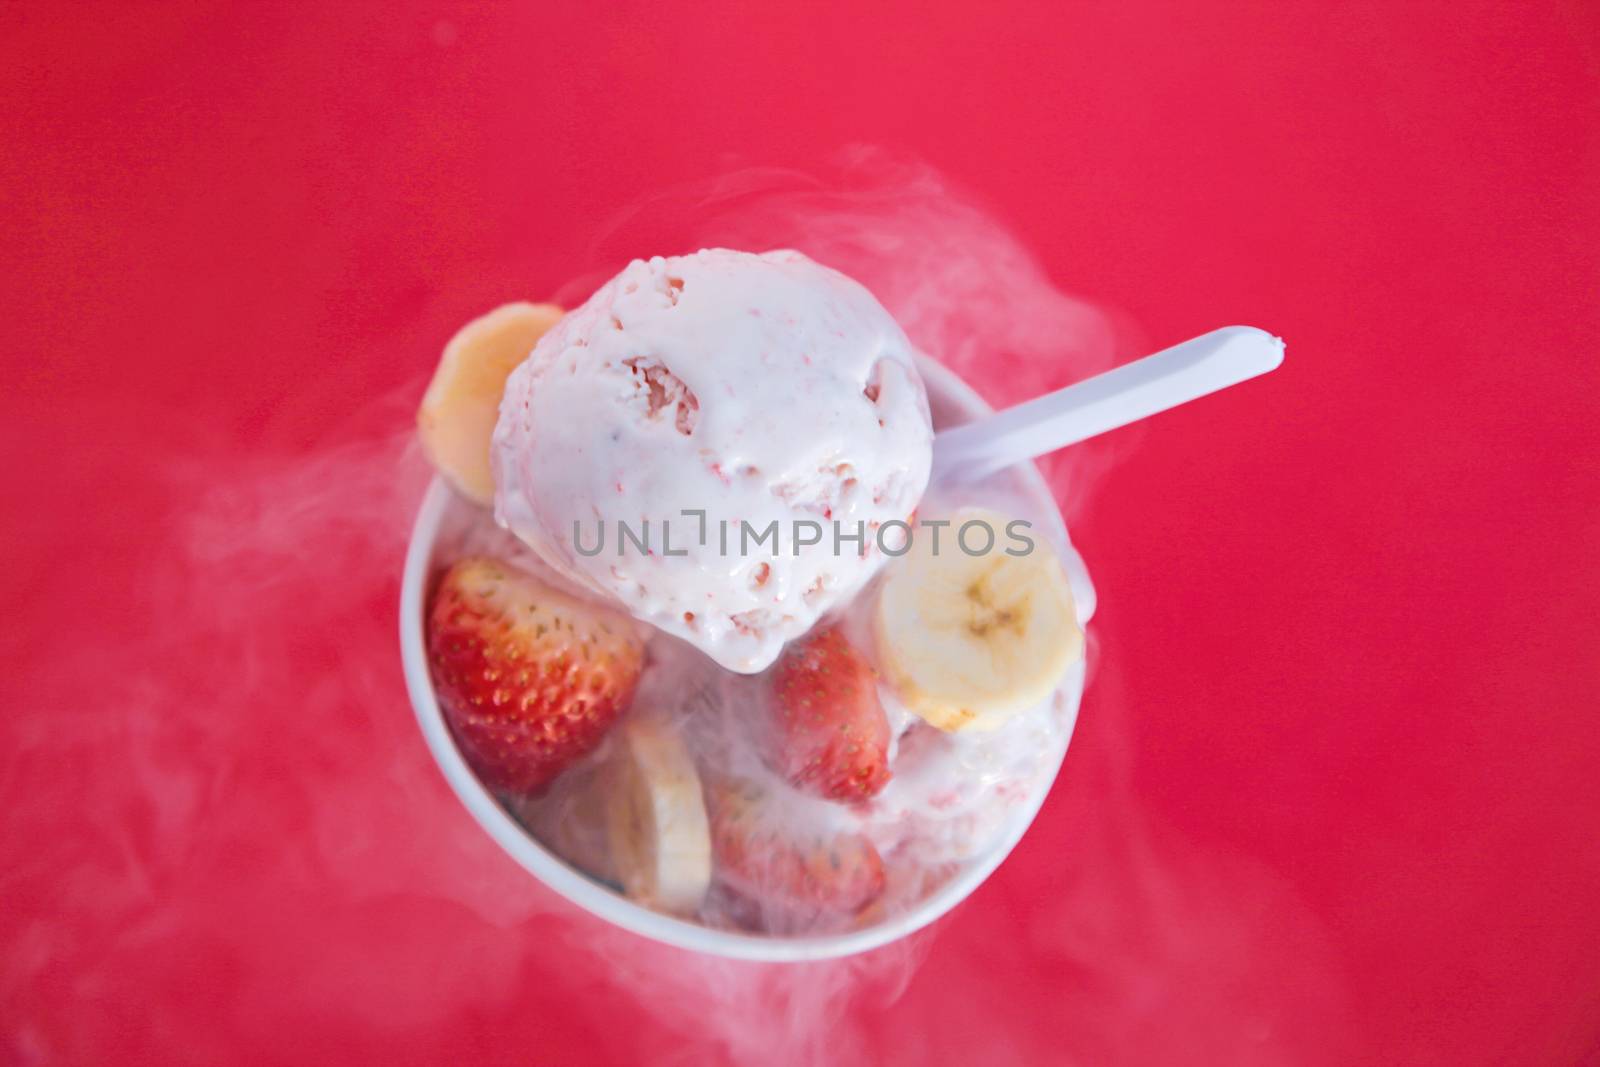 Strawberry and Banana Ice Cream with real fruits by haiderazim